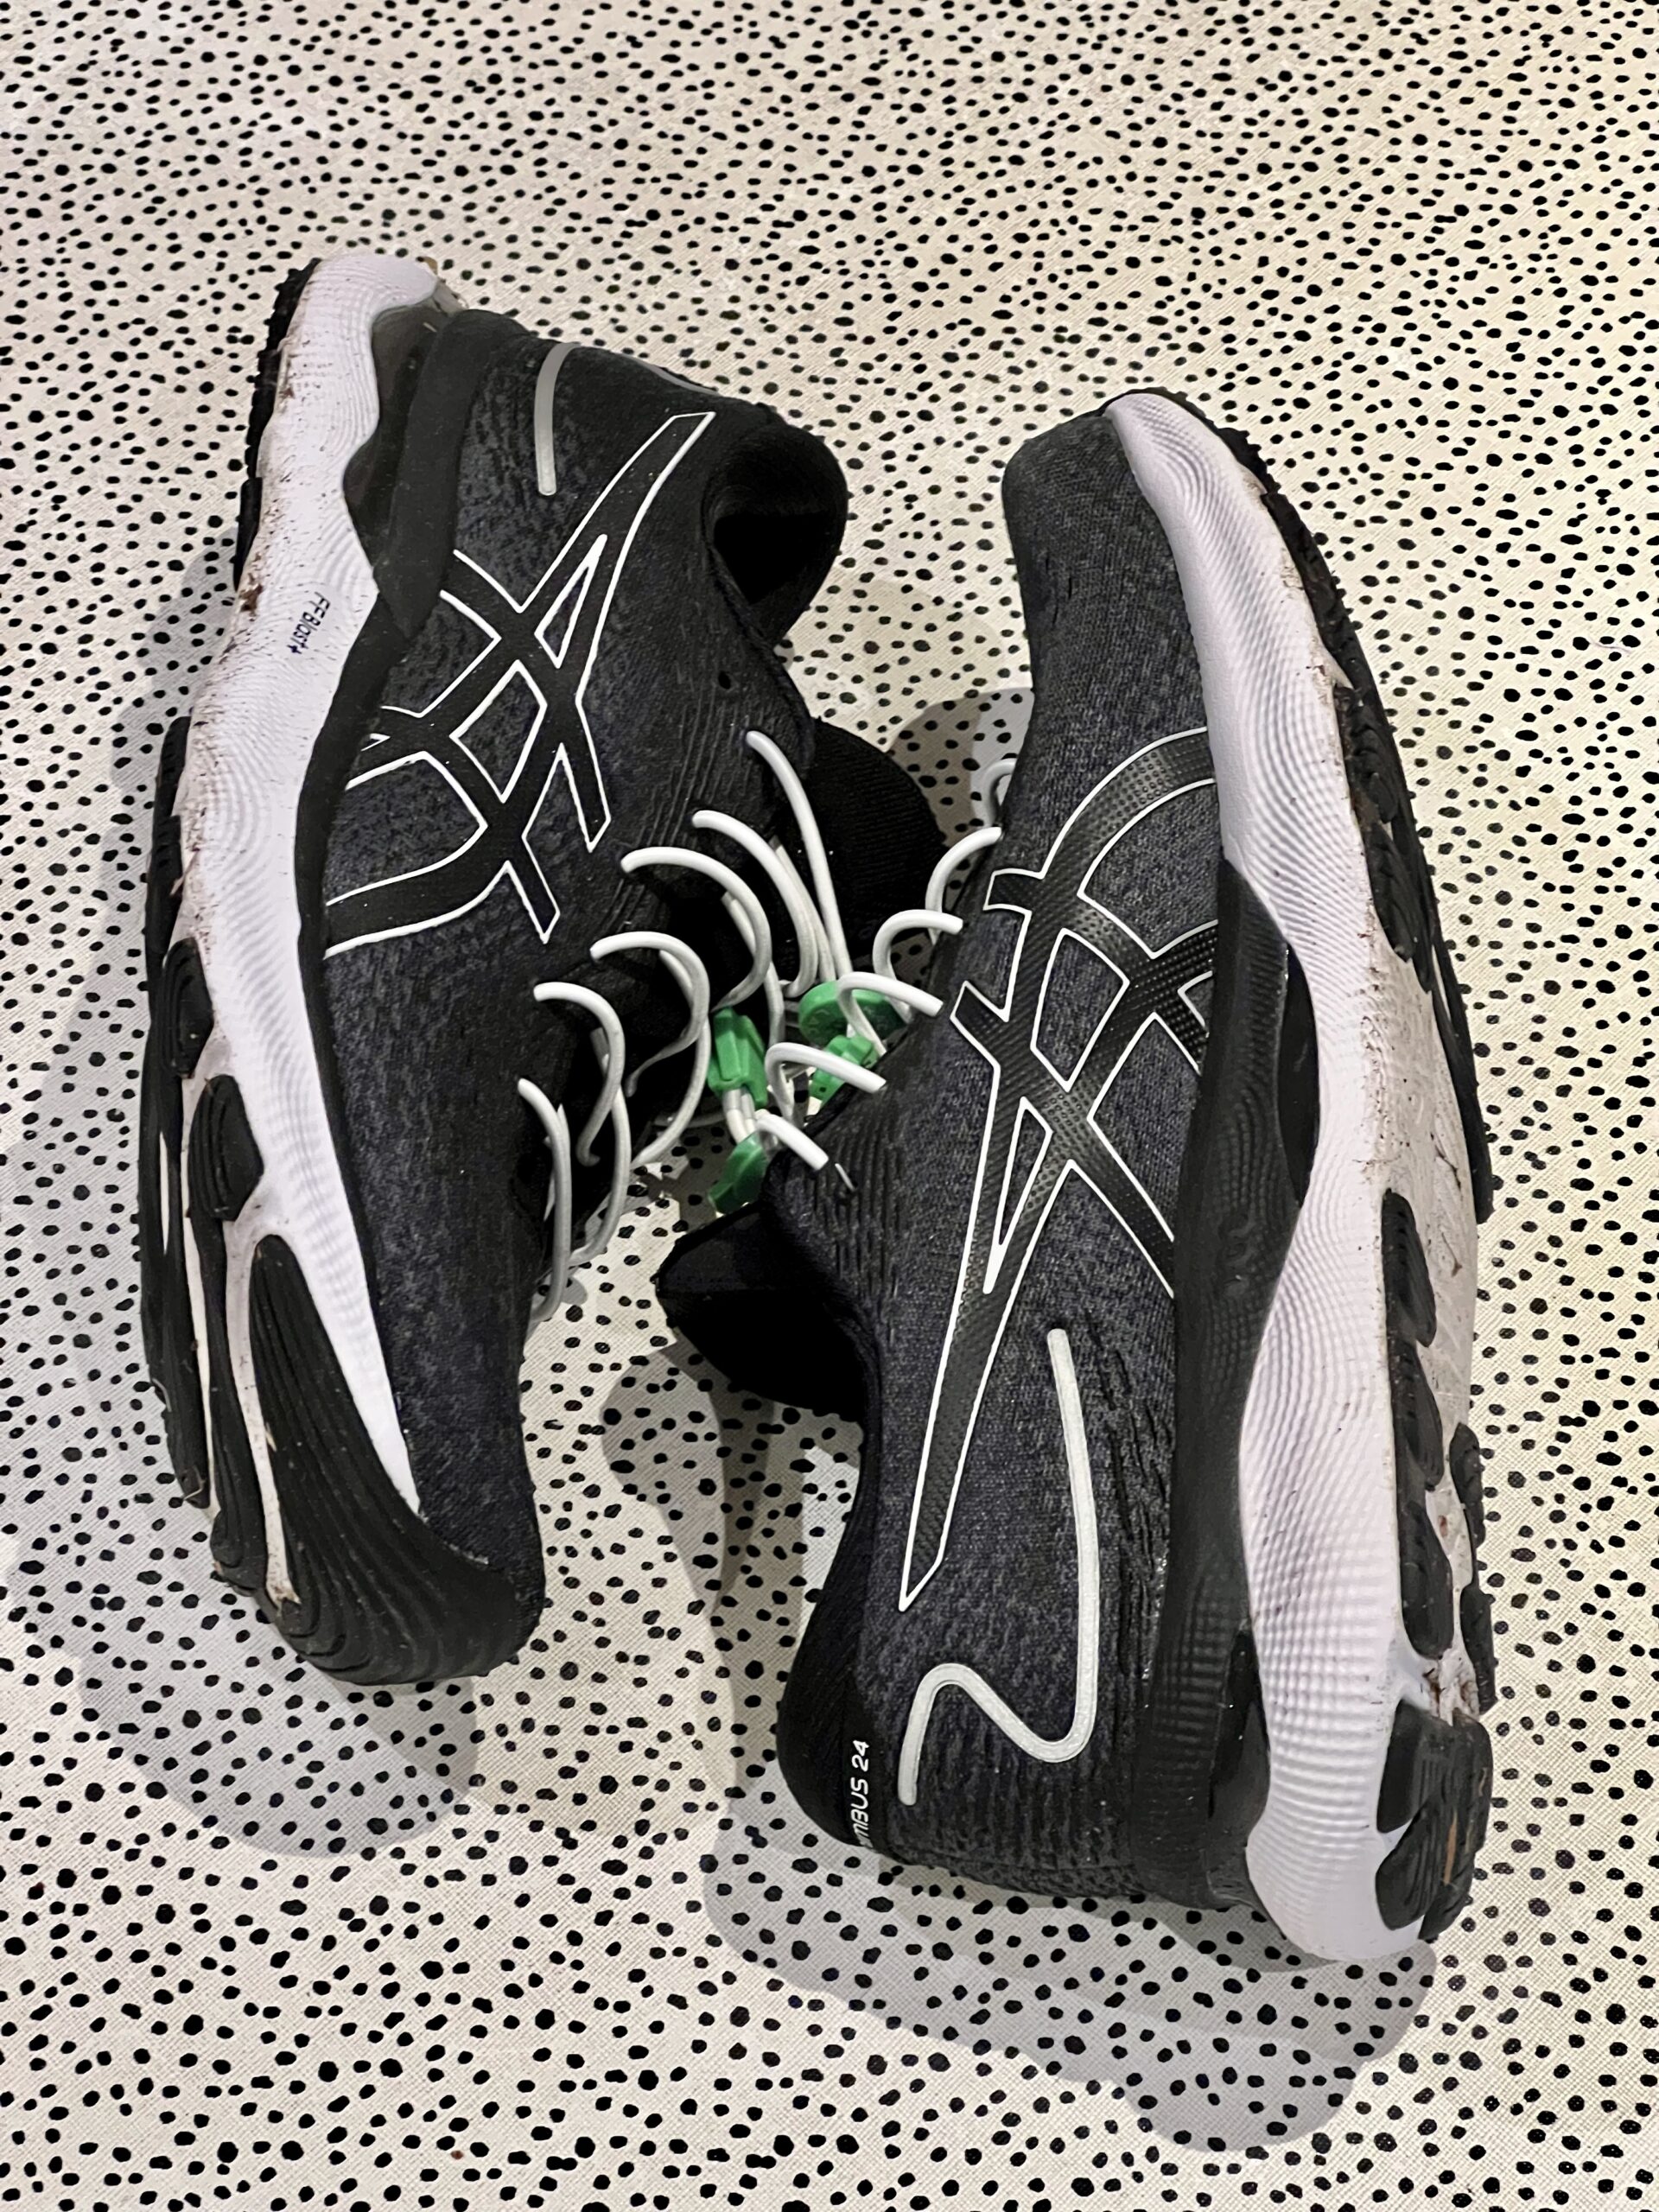 Asics Gel Nimbus 24 review - Are they still the ultimate neutral running  shoe? - REAL Athletes - TRUSTED Reviews